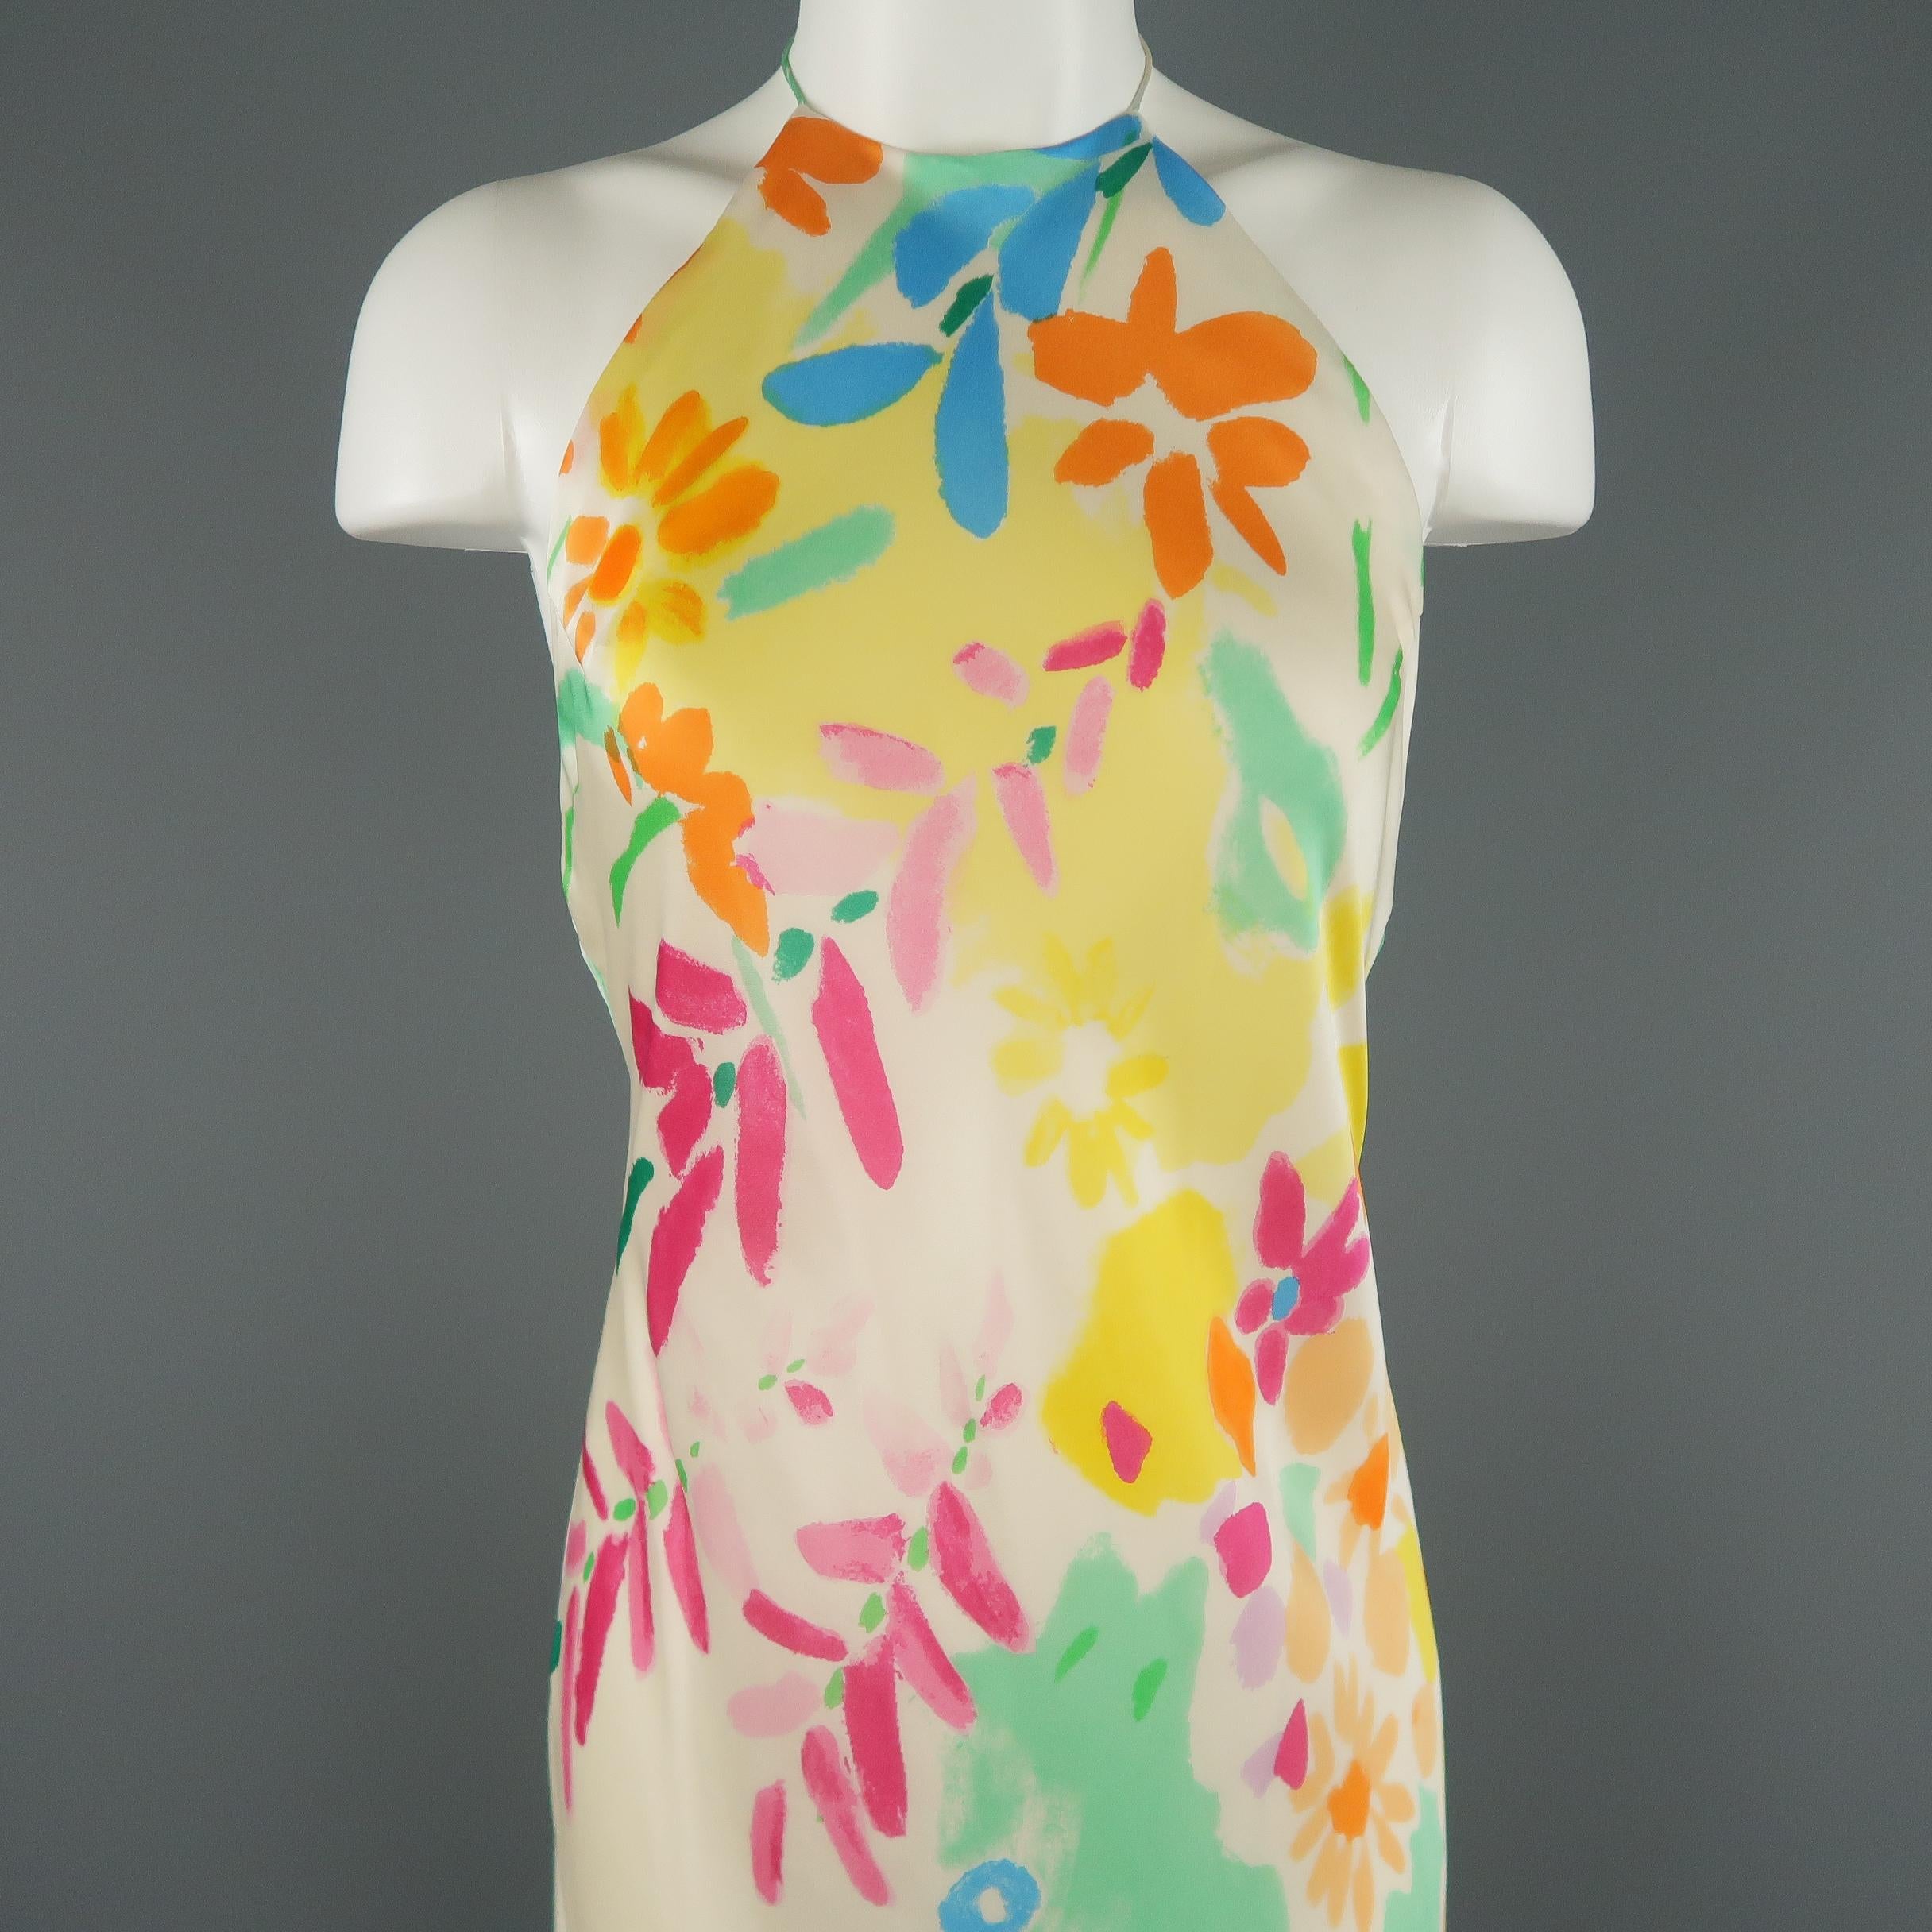 RALPH LAUREN BLACK LABEL gown comes in cream silk with all over multi-color watercolor floral print, fitted silhouette with a subtle drape, low cut back, and sleeveless tied halter neckline. Made in USA.
 
Very Good Pre-Owned Condition.
Marked: 6
